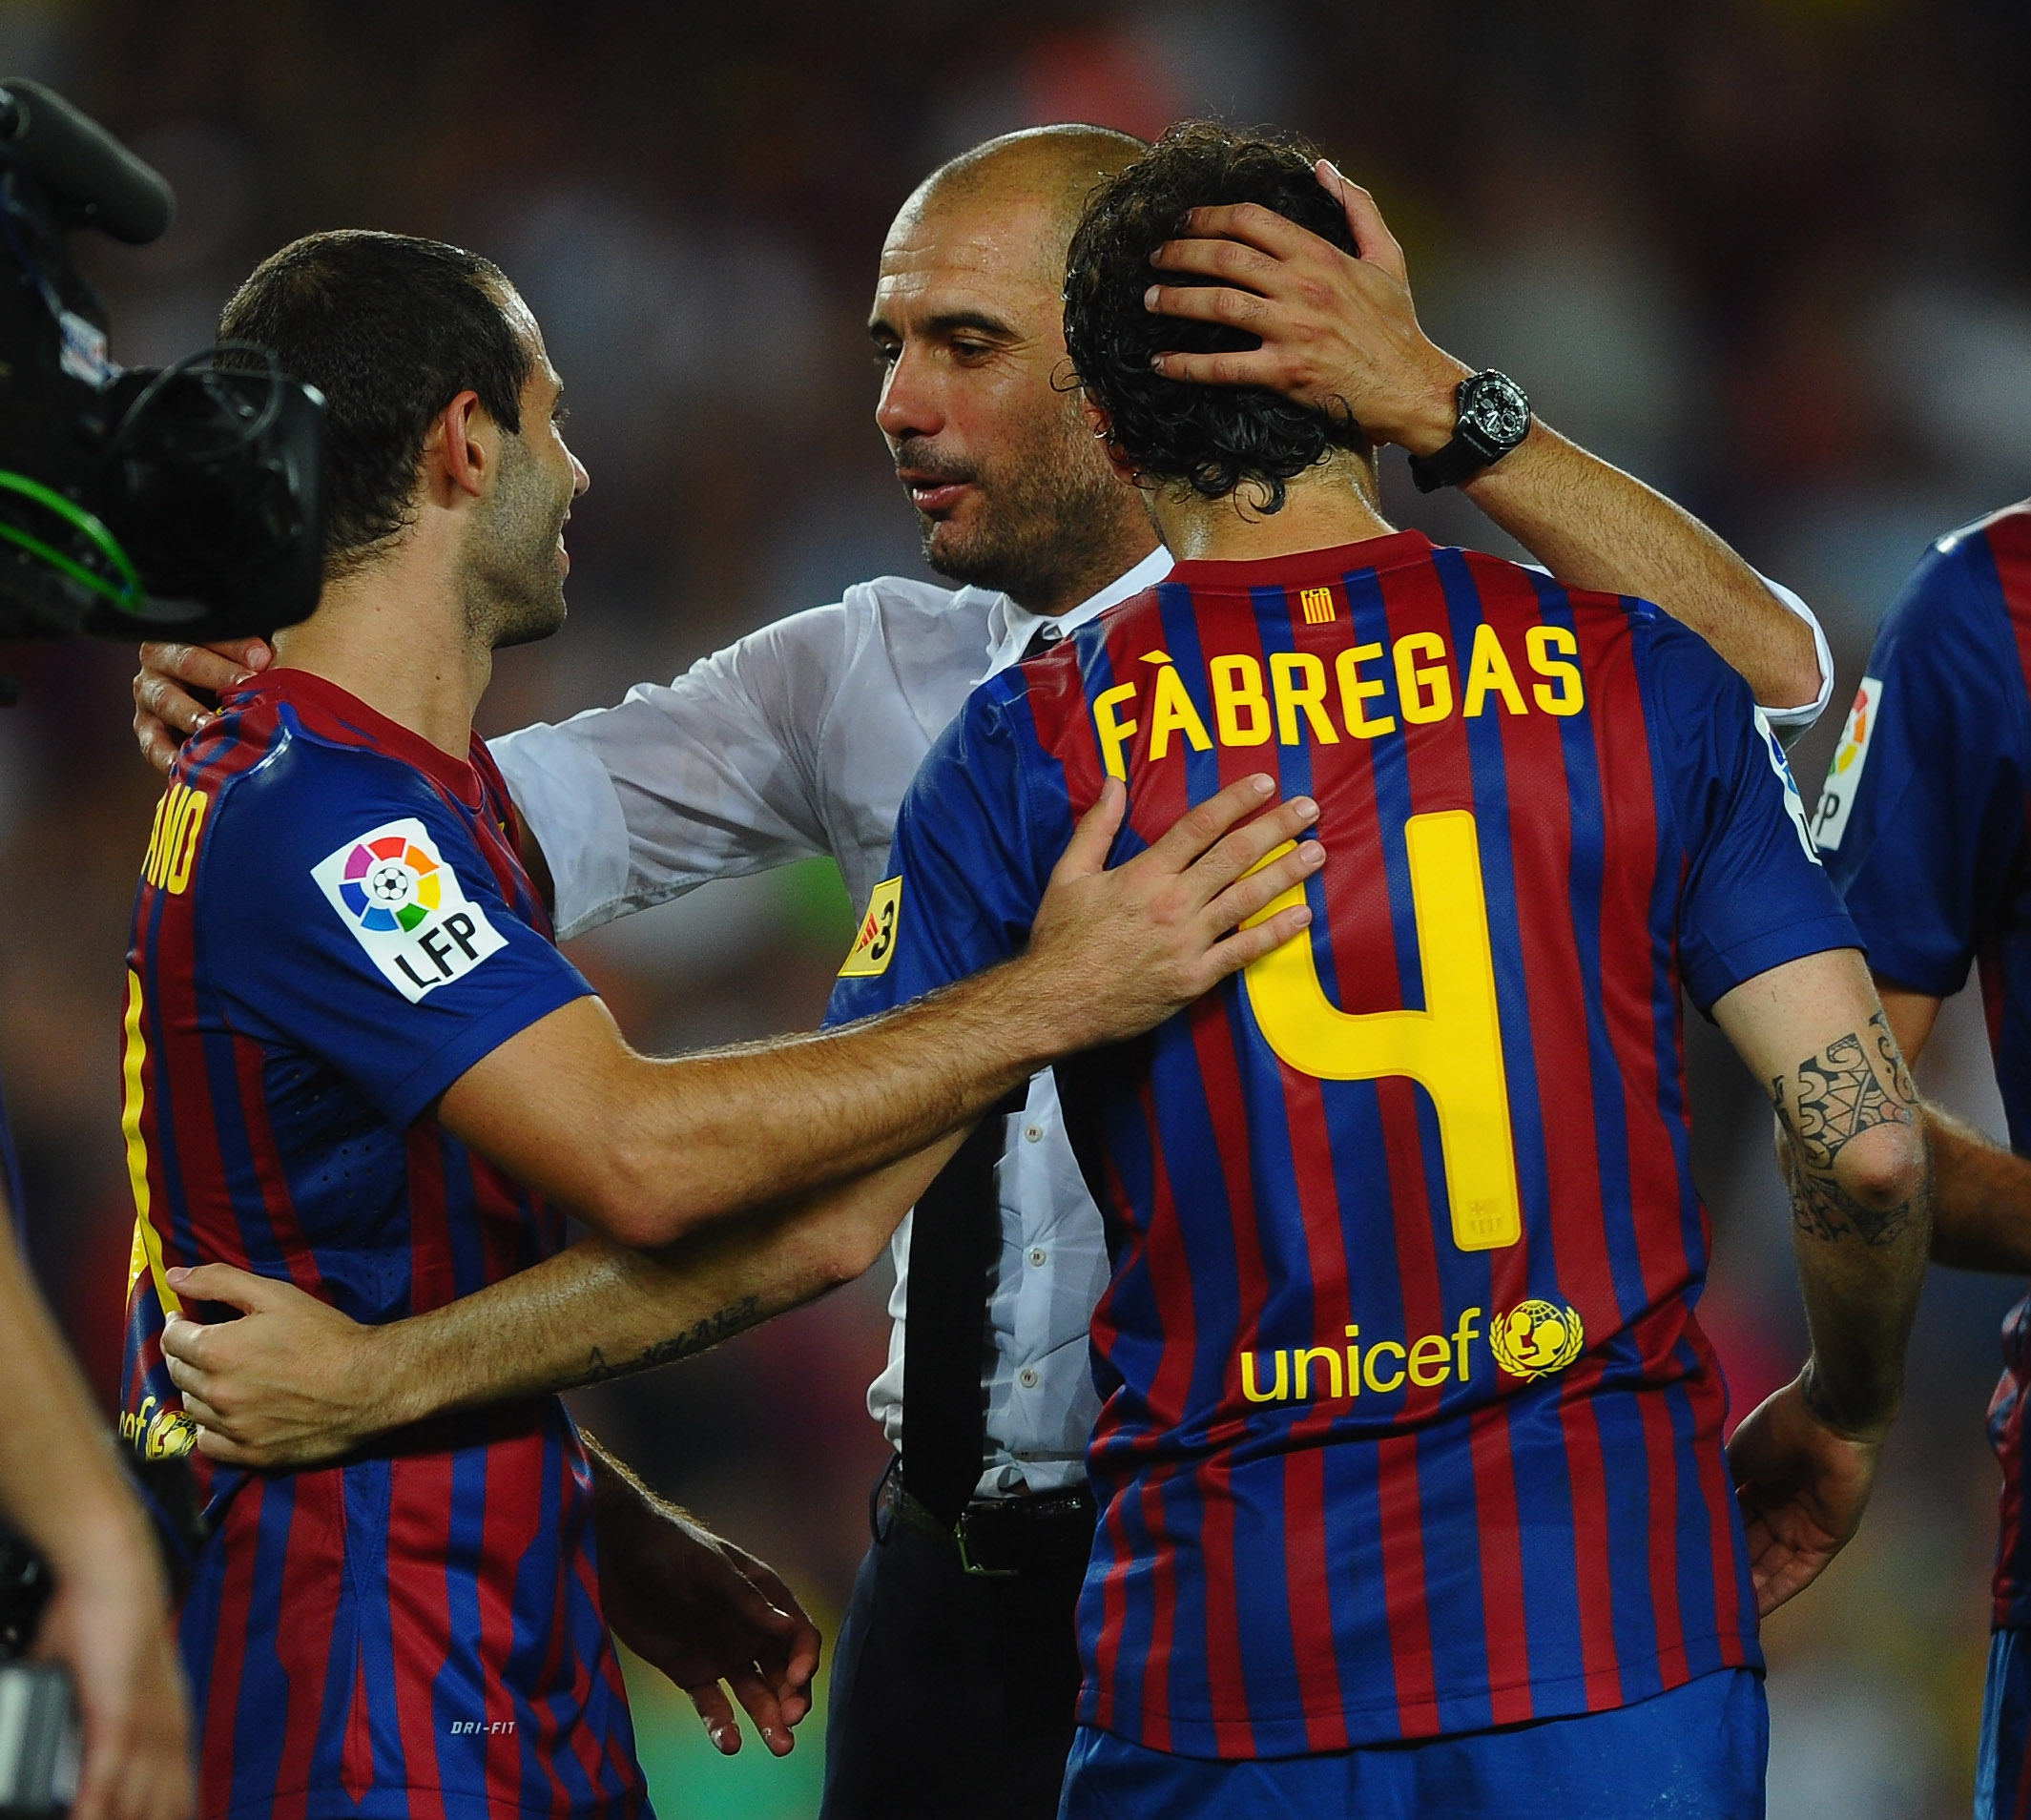 BARCELONA, SPAIN - AUGUST 17: Josep Guardiola  of Barcelona congratulates Cesc Fabregas and Javier Mascherano after victory in the Super Cup second leg match between Barcelona and Real Madrid at Nou Camp on August 17, 2011 in Barcelona, Spain.  (Photo by Laurence Griffiths/Getty Images)